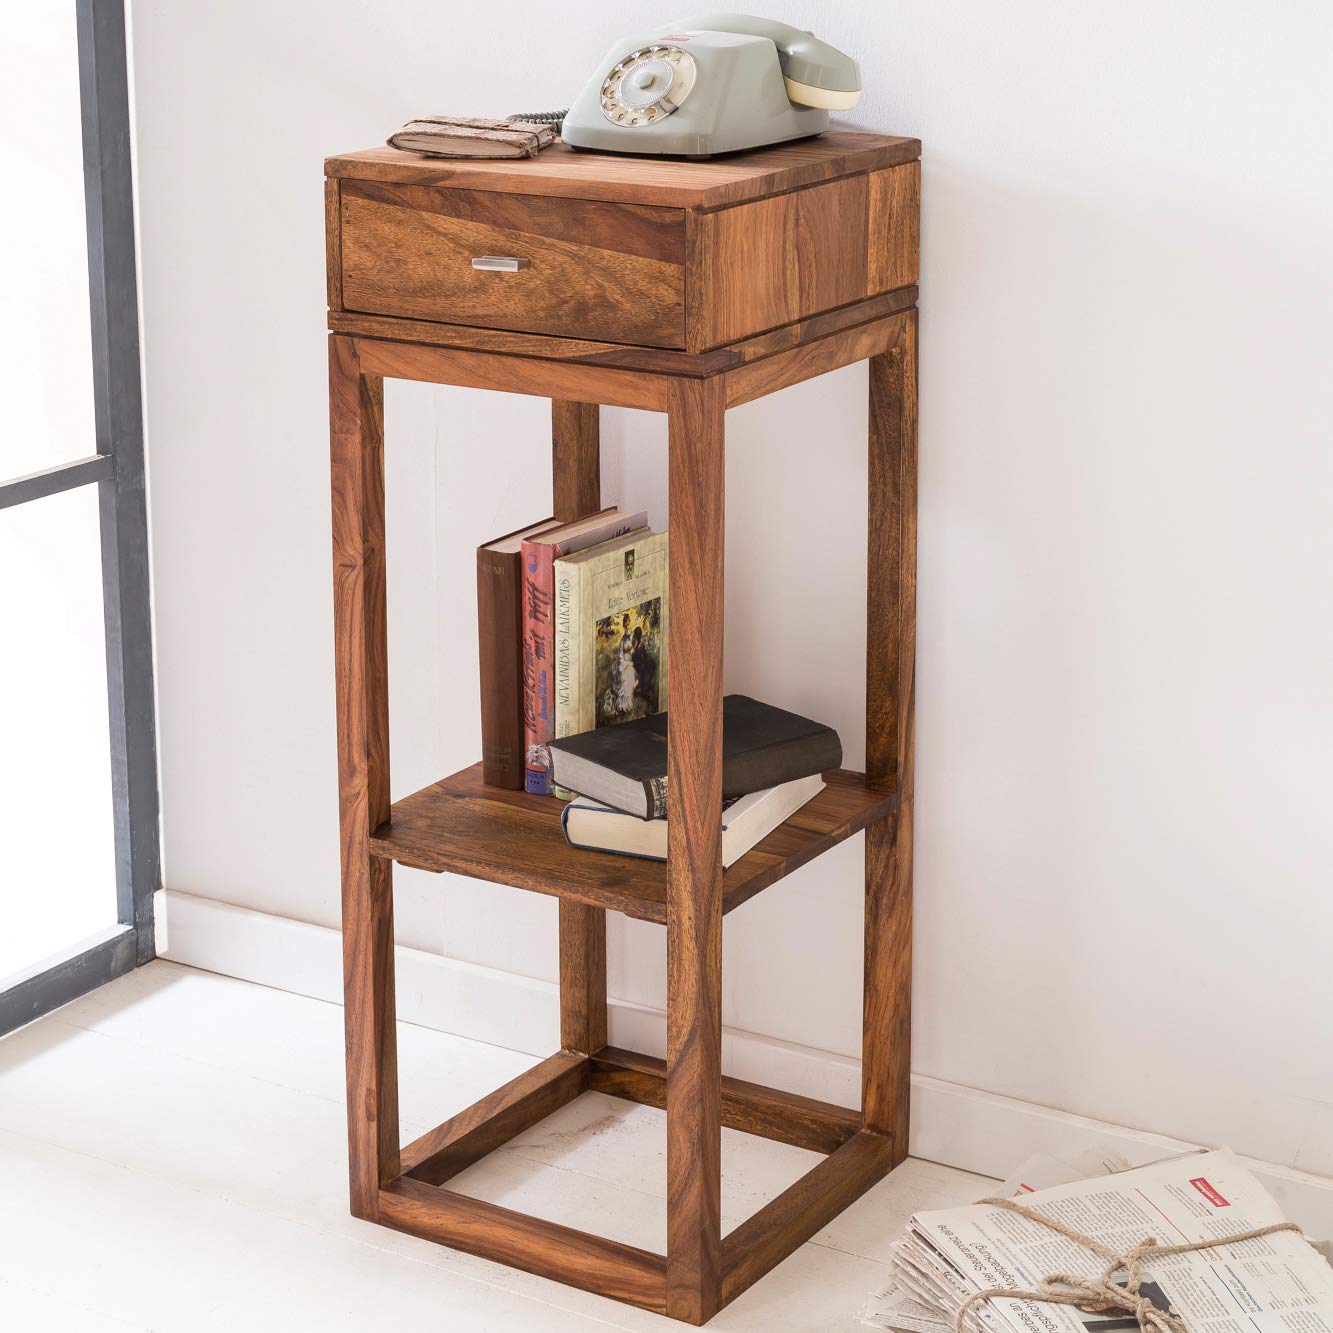 Side table (suitable as telephone table) with single drawer made of solid sheesham wood